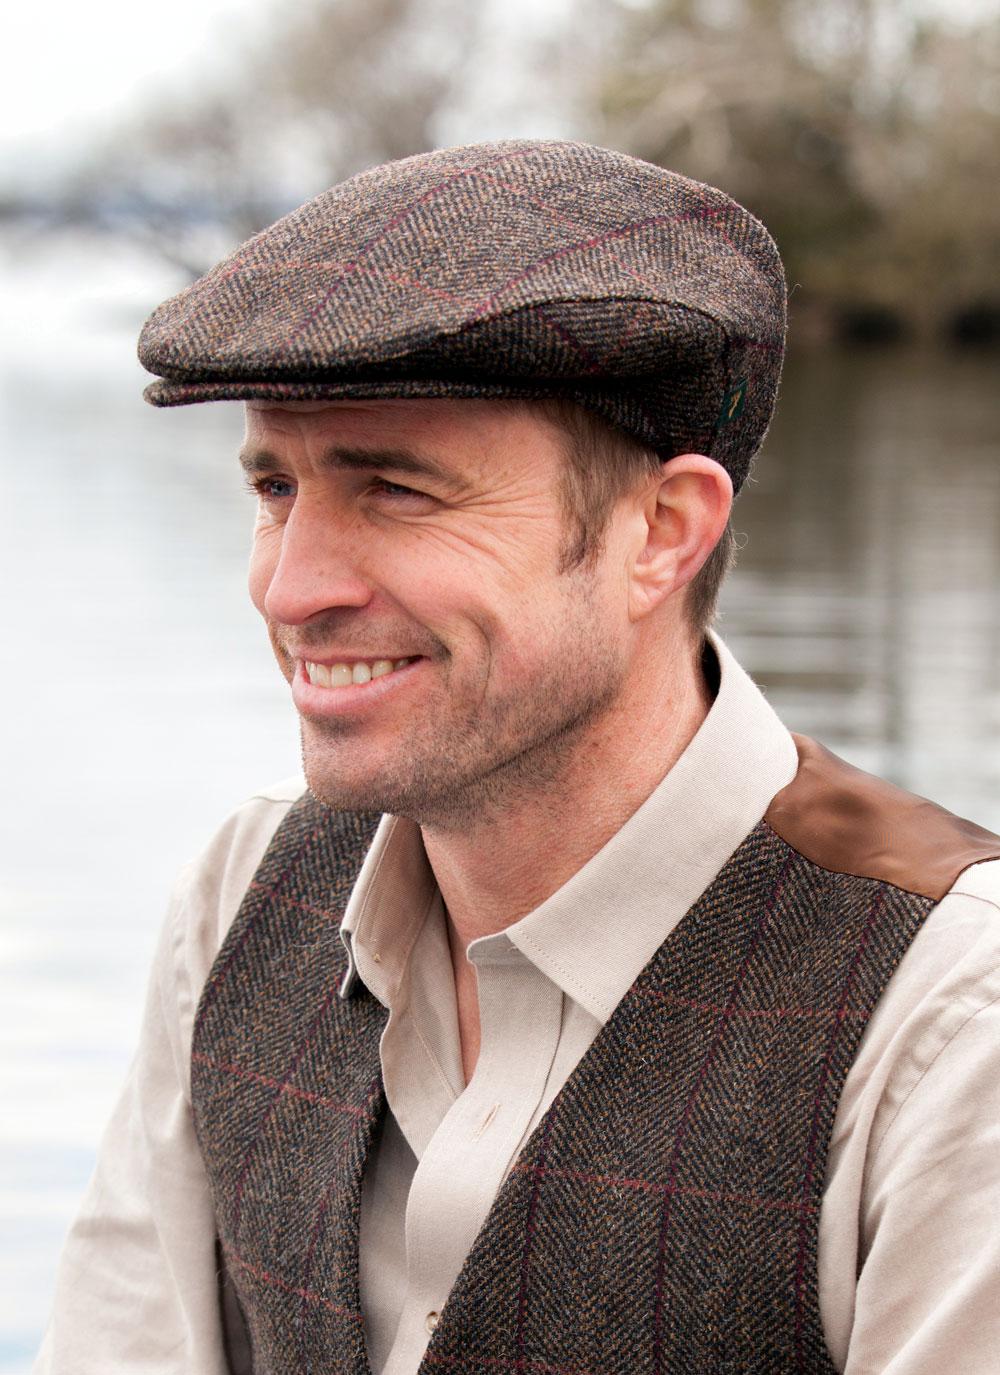 Traditional Flat Caps to Protect Your Irish Roots! 